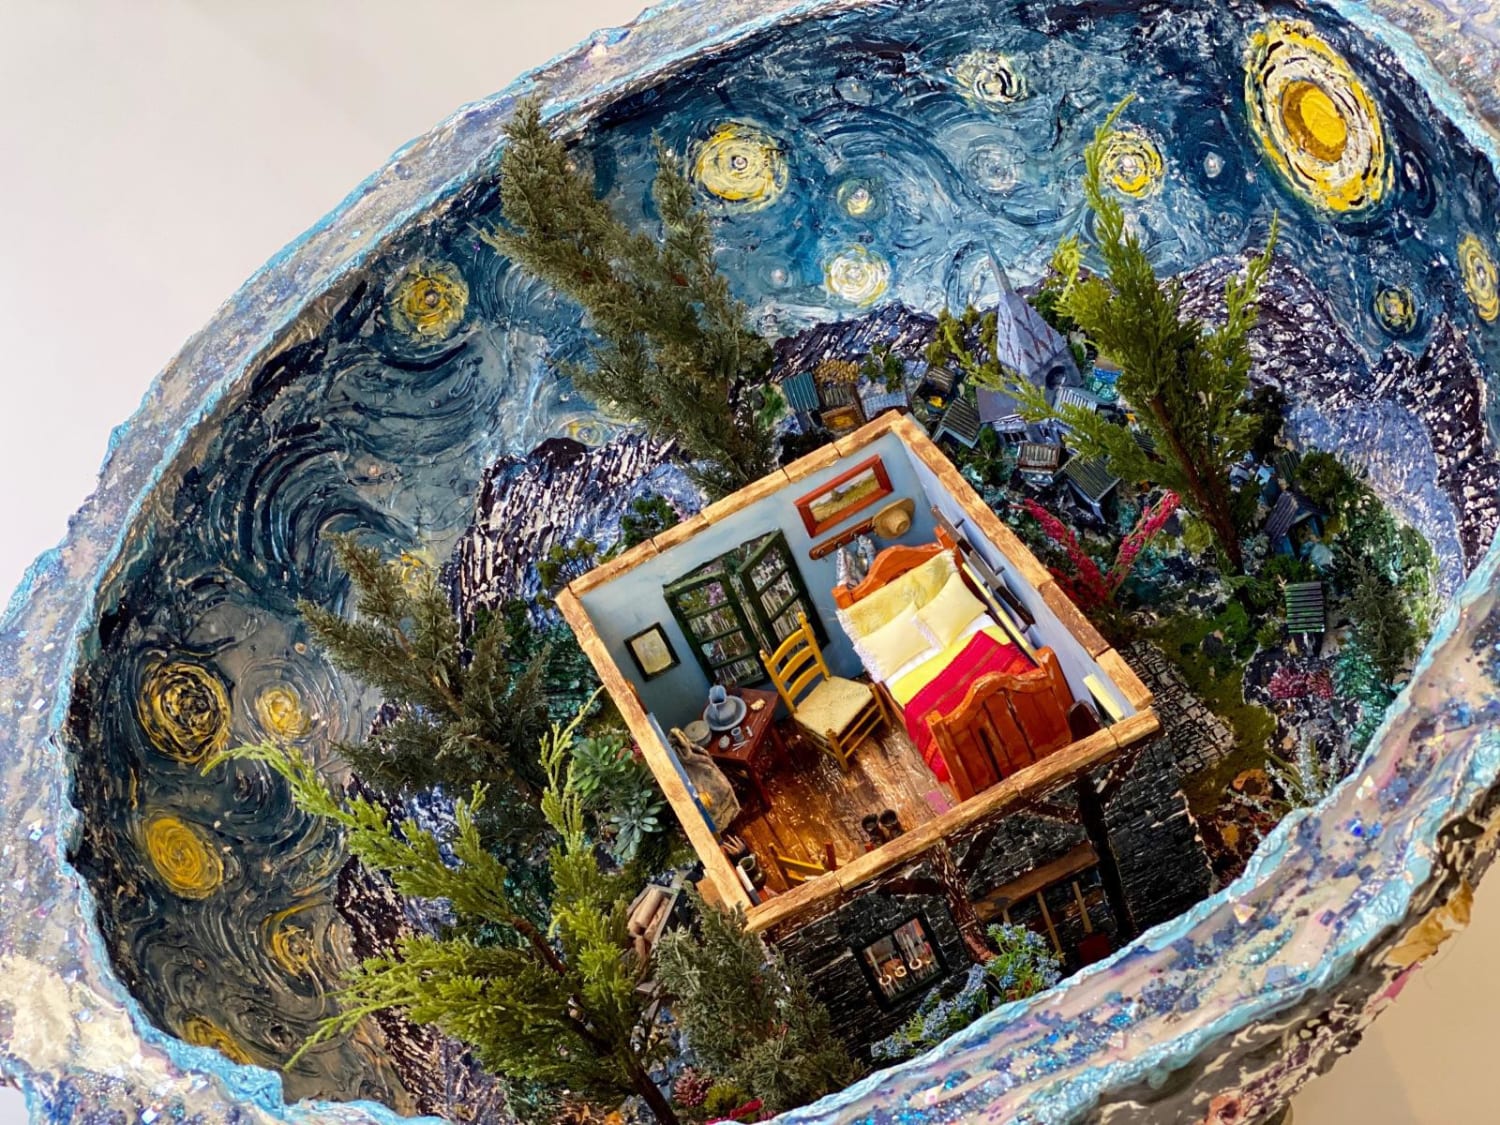 "The Starry Night Geode" by artist Bryan Hamilton Chadwick: a re-creation of Van Gogh's Bedroom in Arles set within one of his other best-known works.